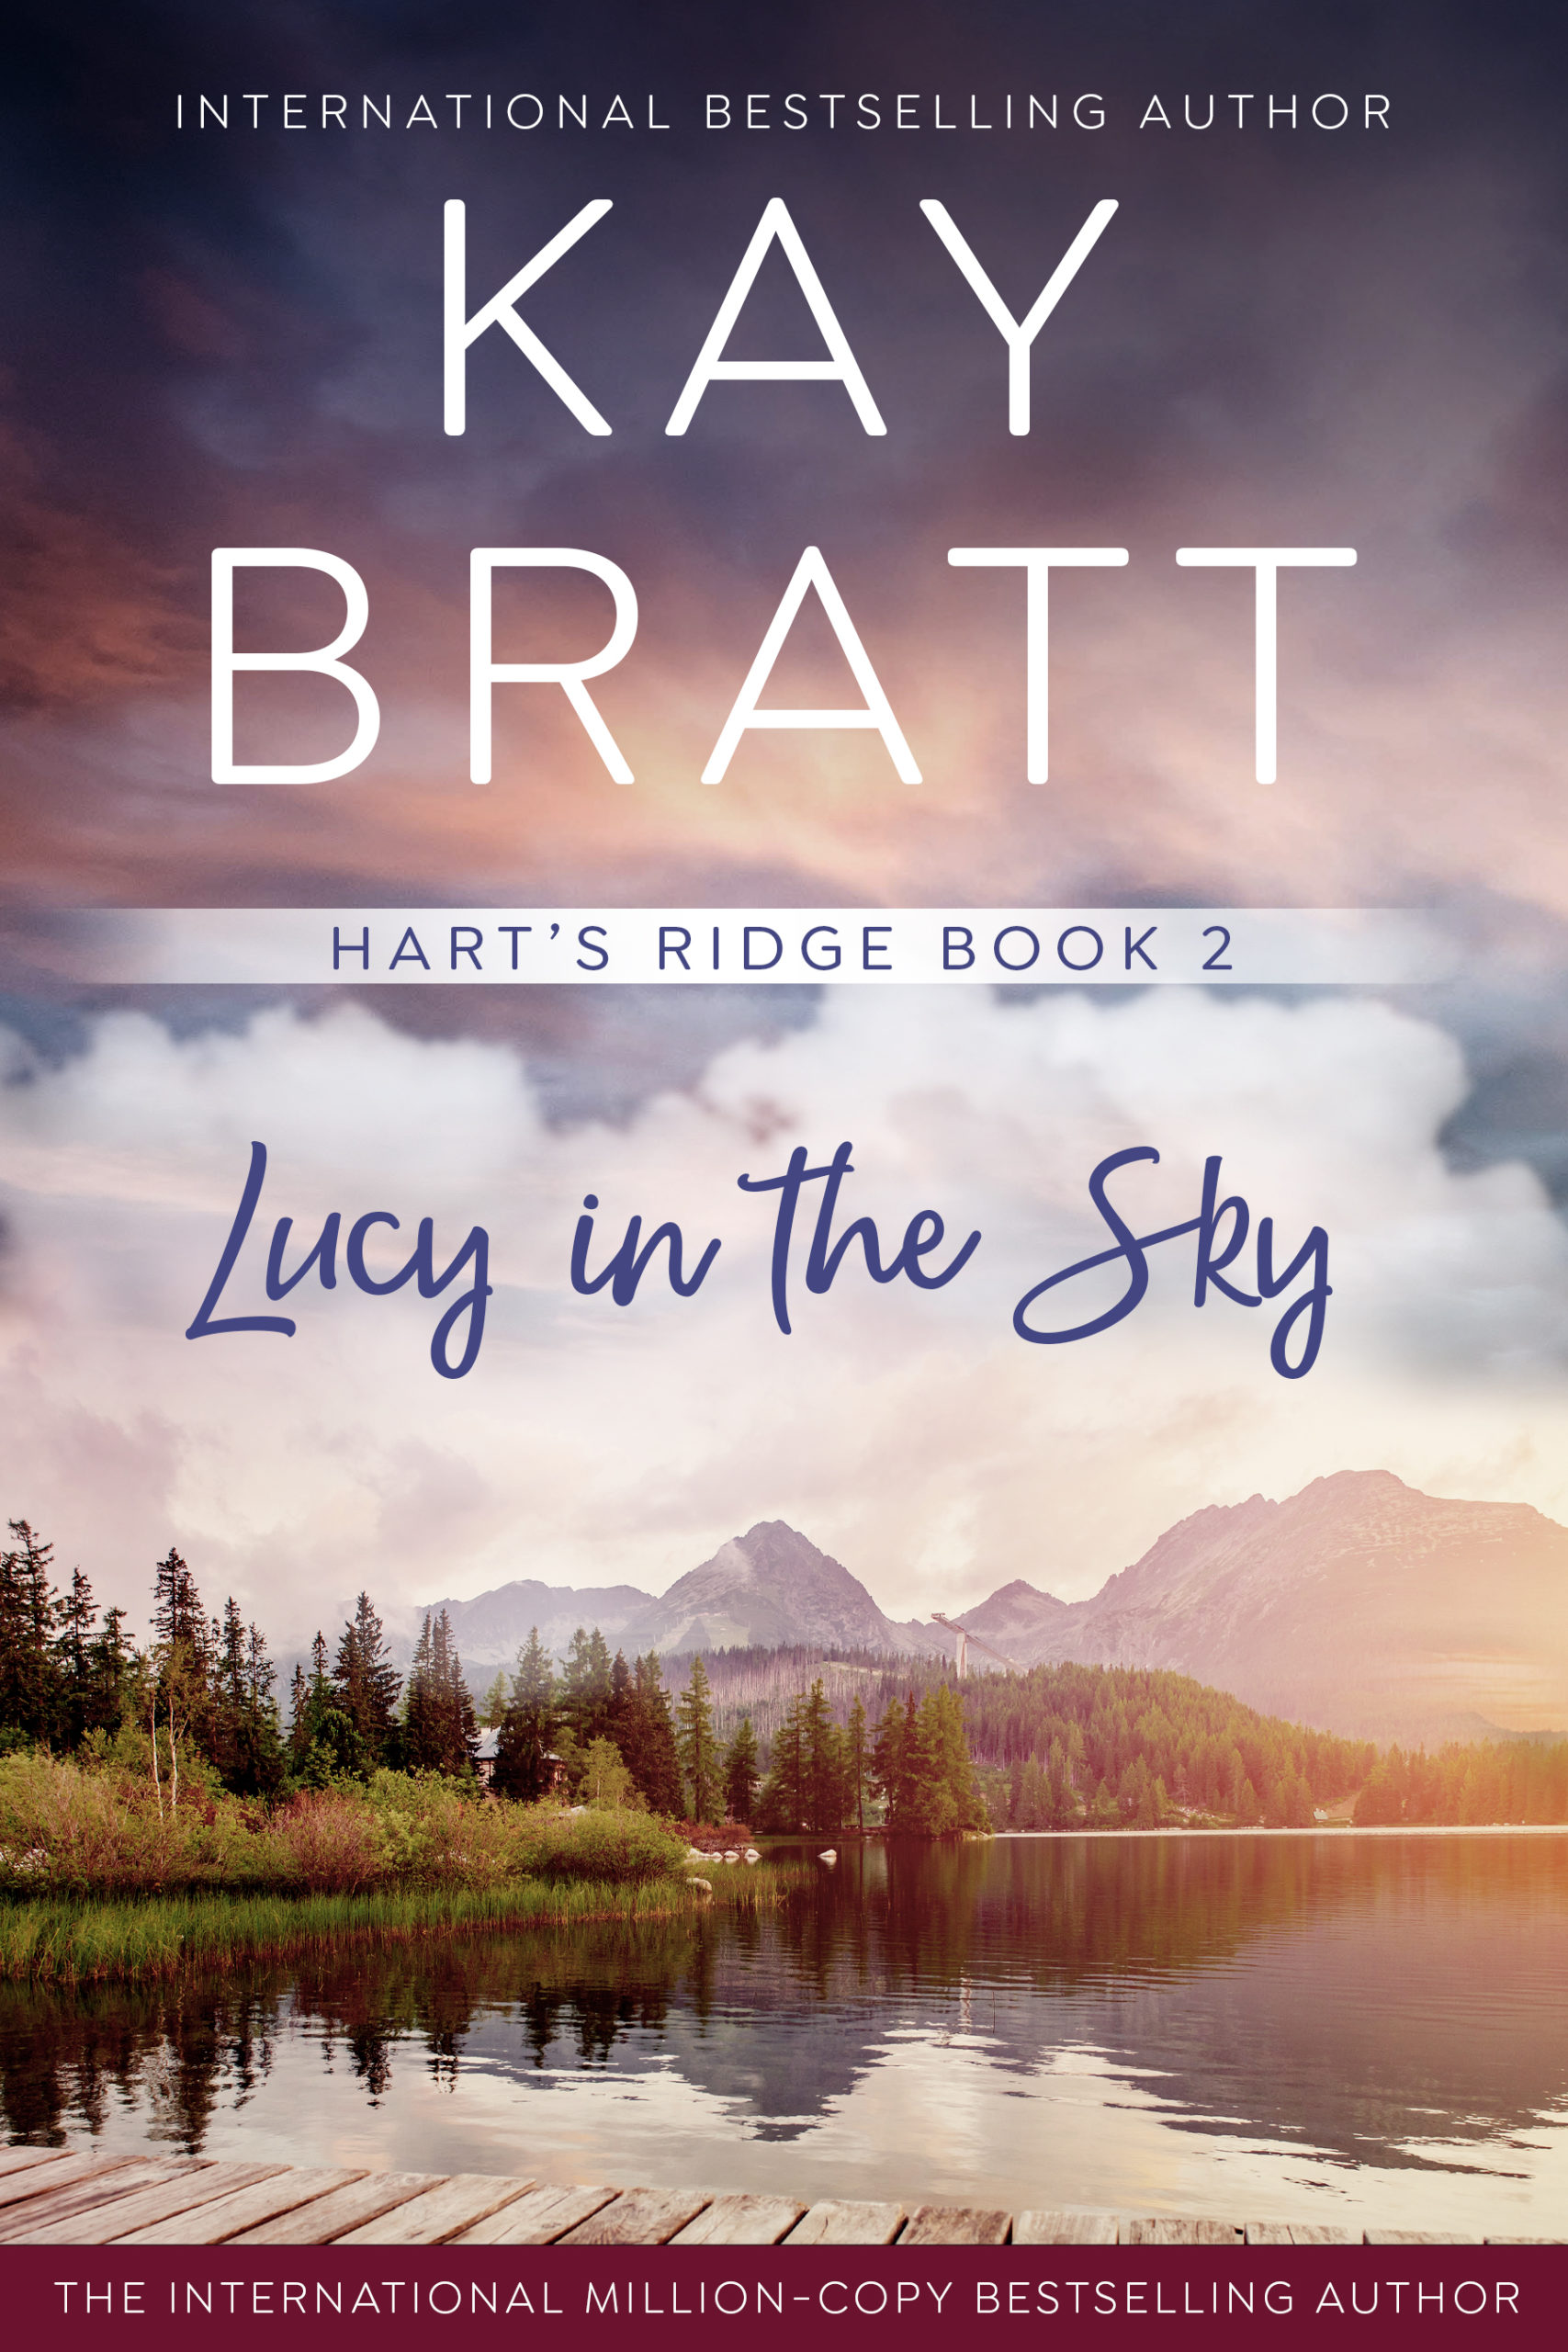 Book2_LucyInTheSky_New_Banner